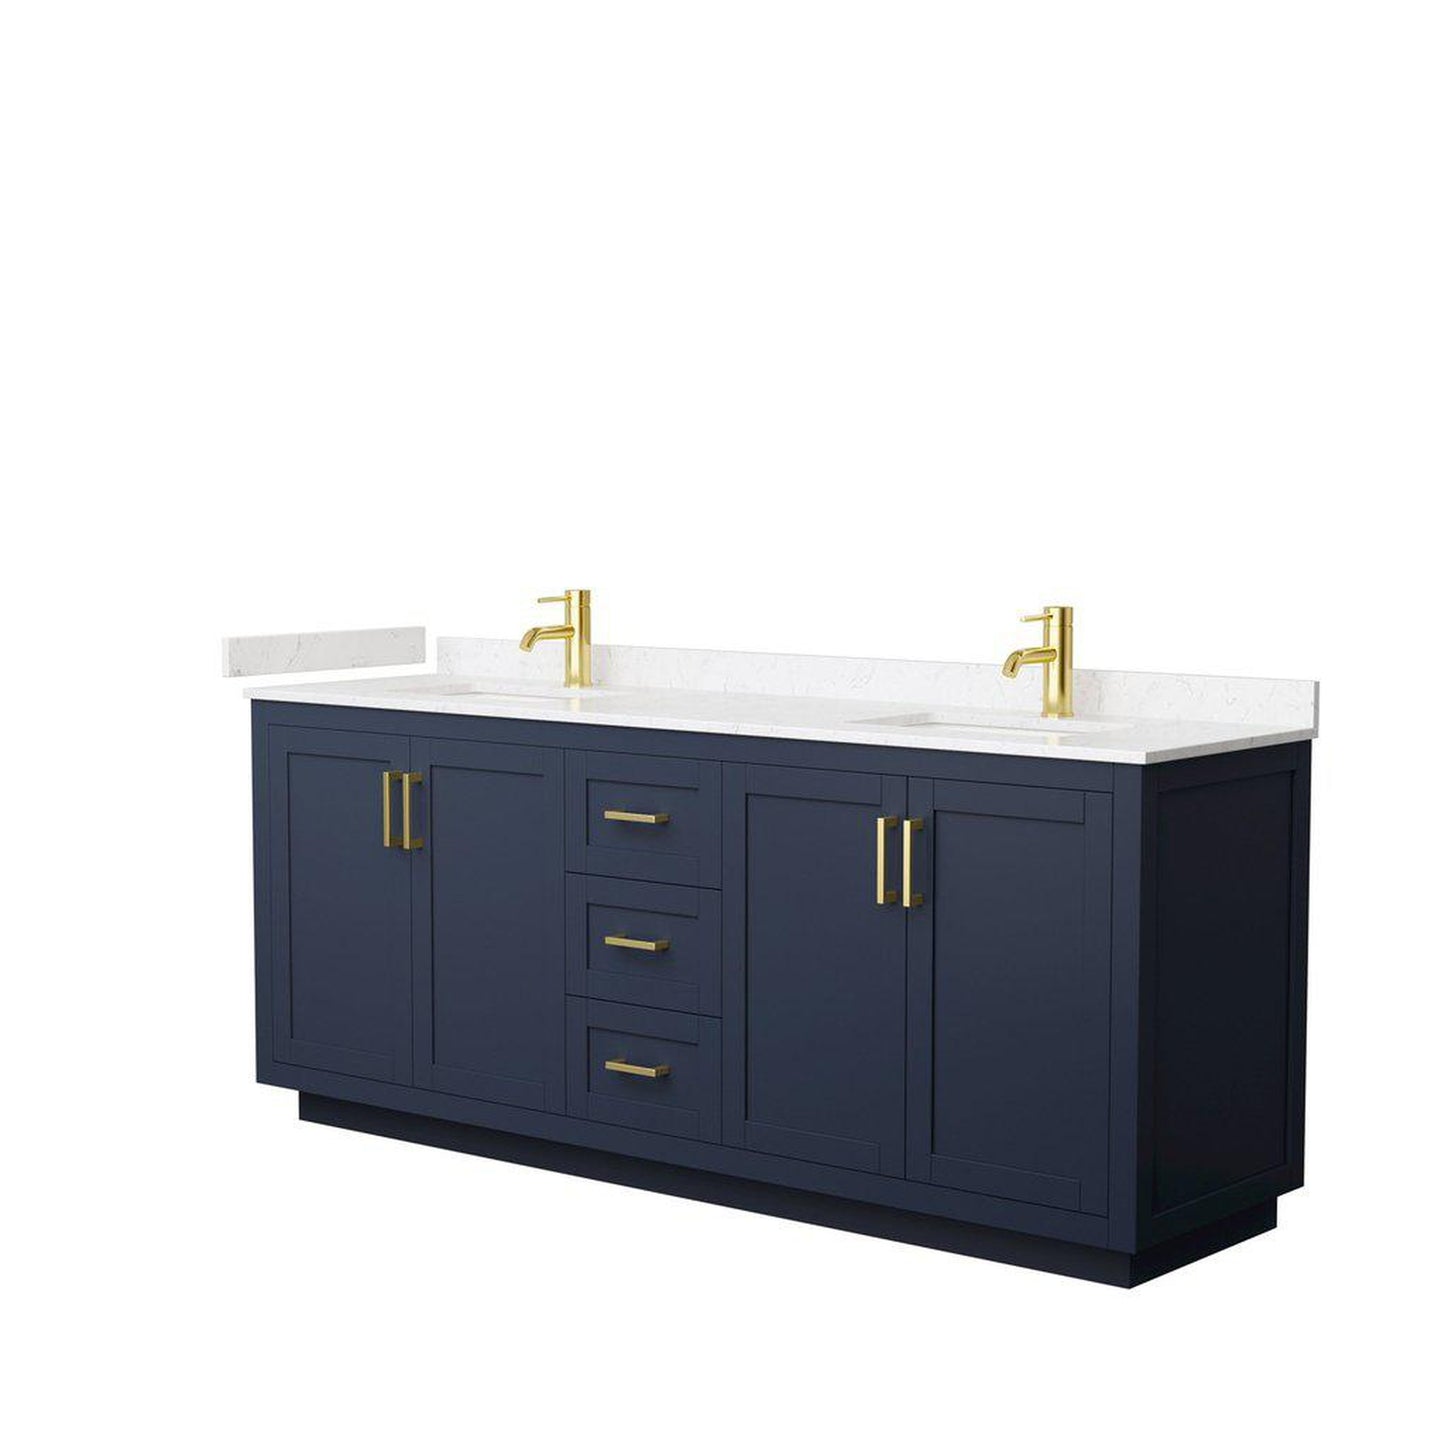 Wyndham Collection Miranda 80" Double Bathroom Dark Blue Vanity Set With Light-Vein Carrara Cultured Marble Countertop, Undermount Square Sink, And Brushed Gold Trim